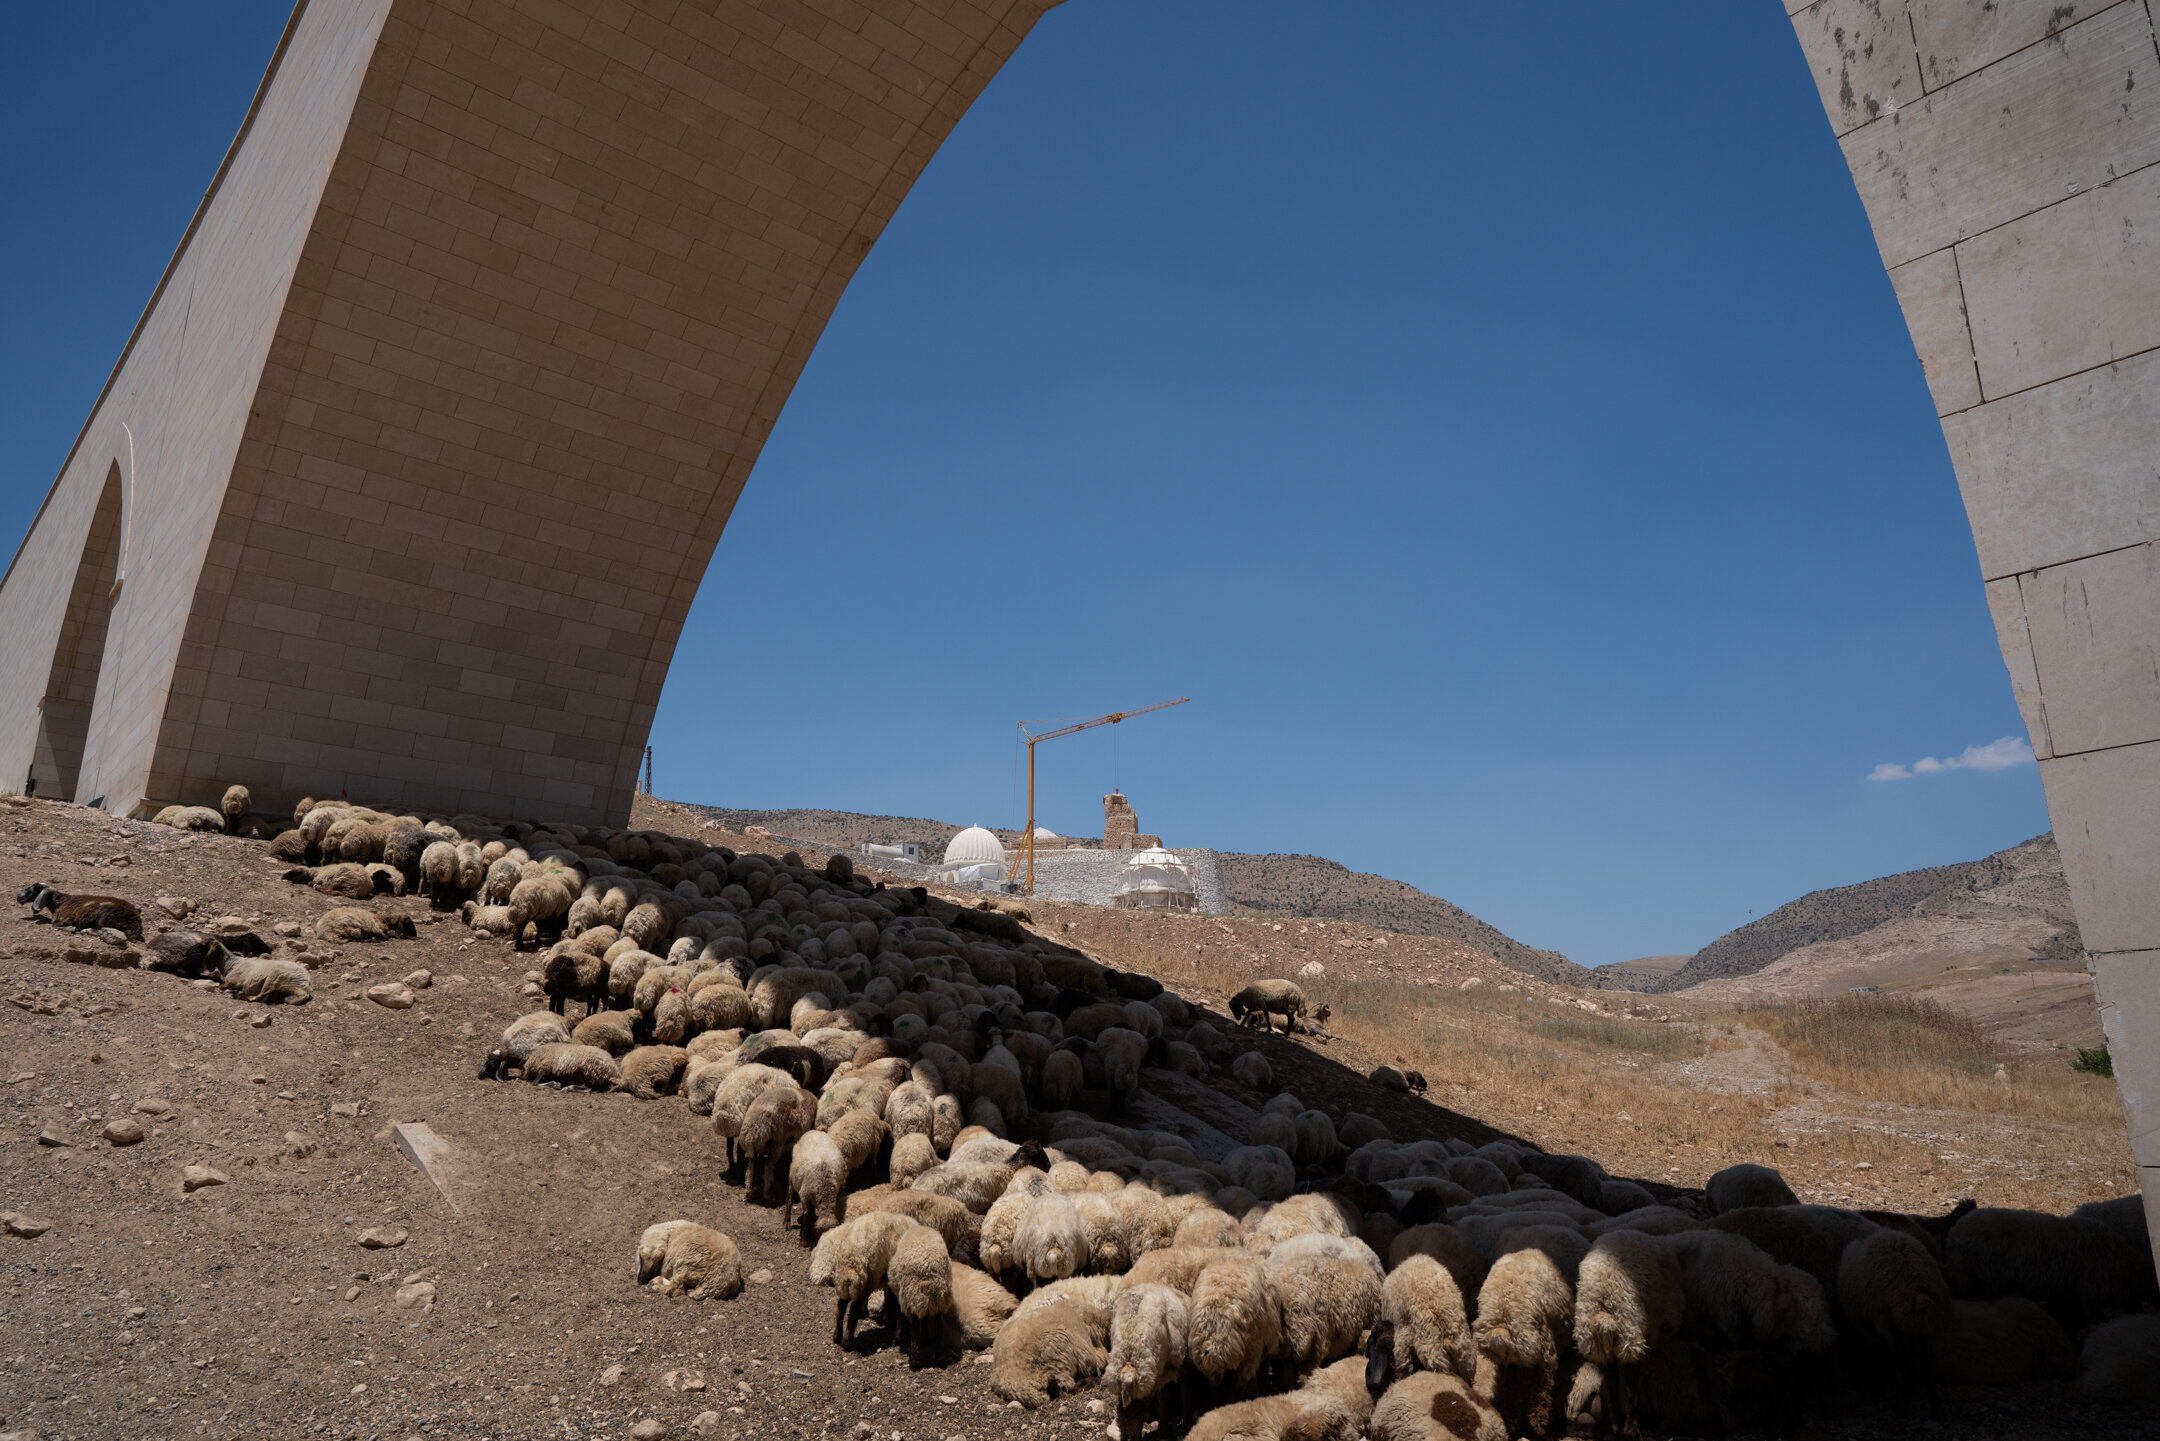 A family's flock rests below the a bridge in New Hasankeyf